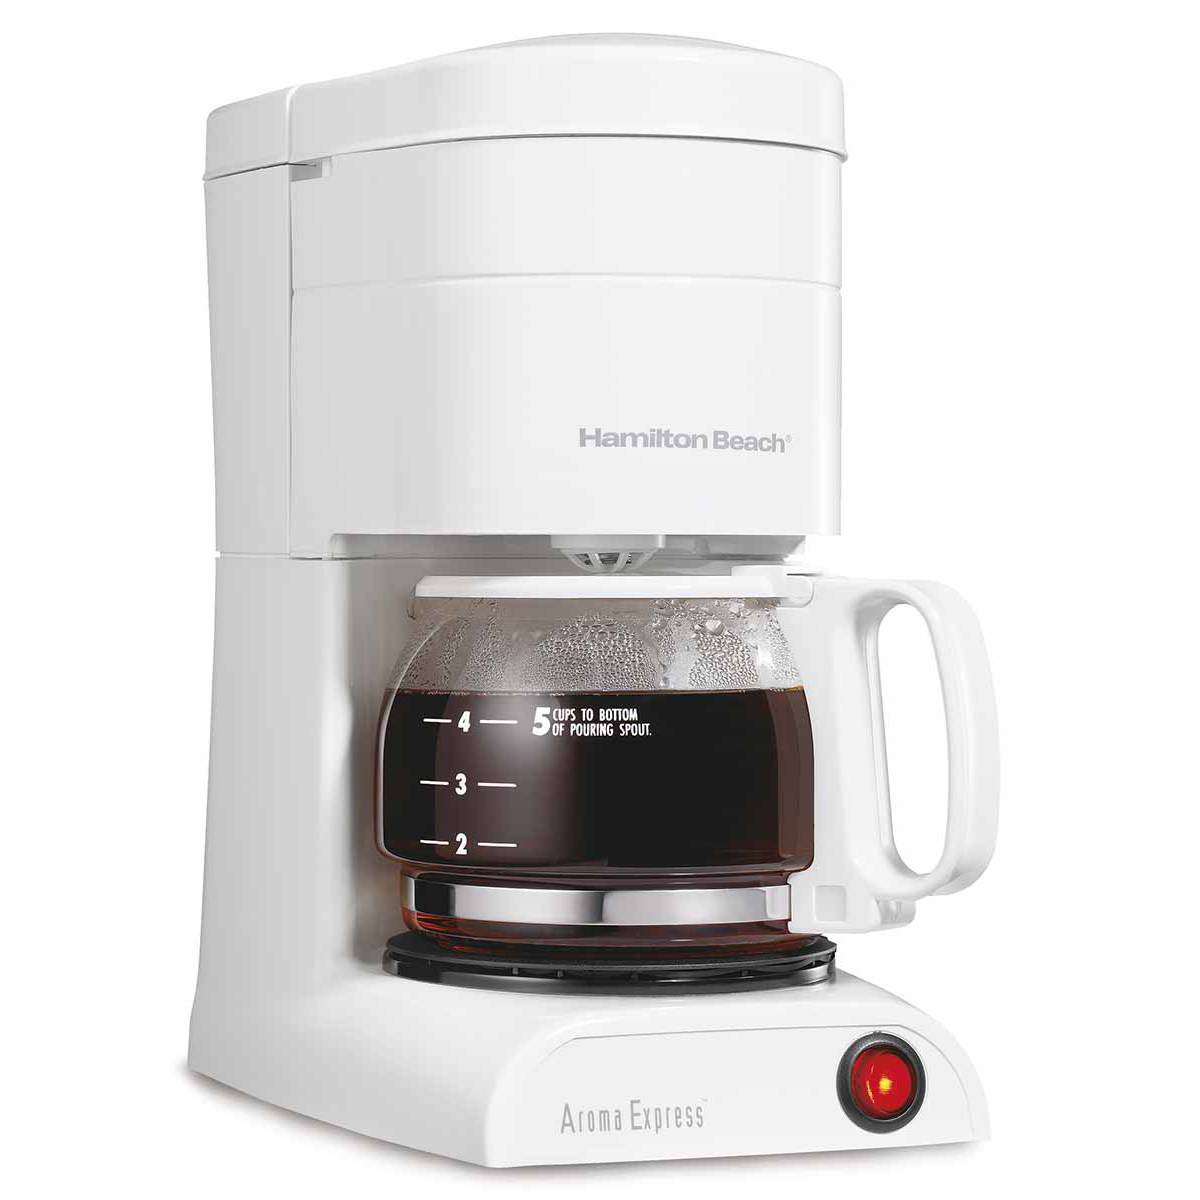 Aroma Express™ 5 Cup Coffee Maker - White (48131)